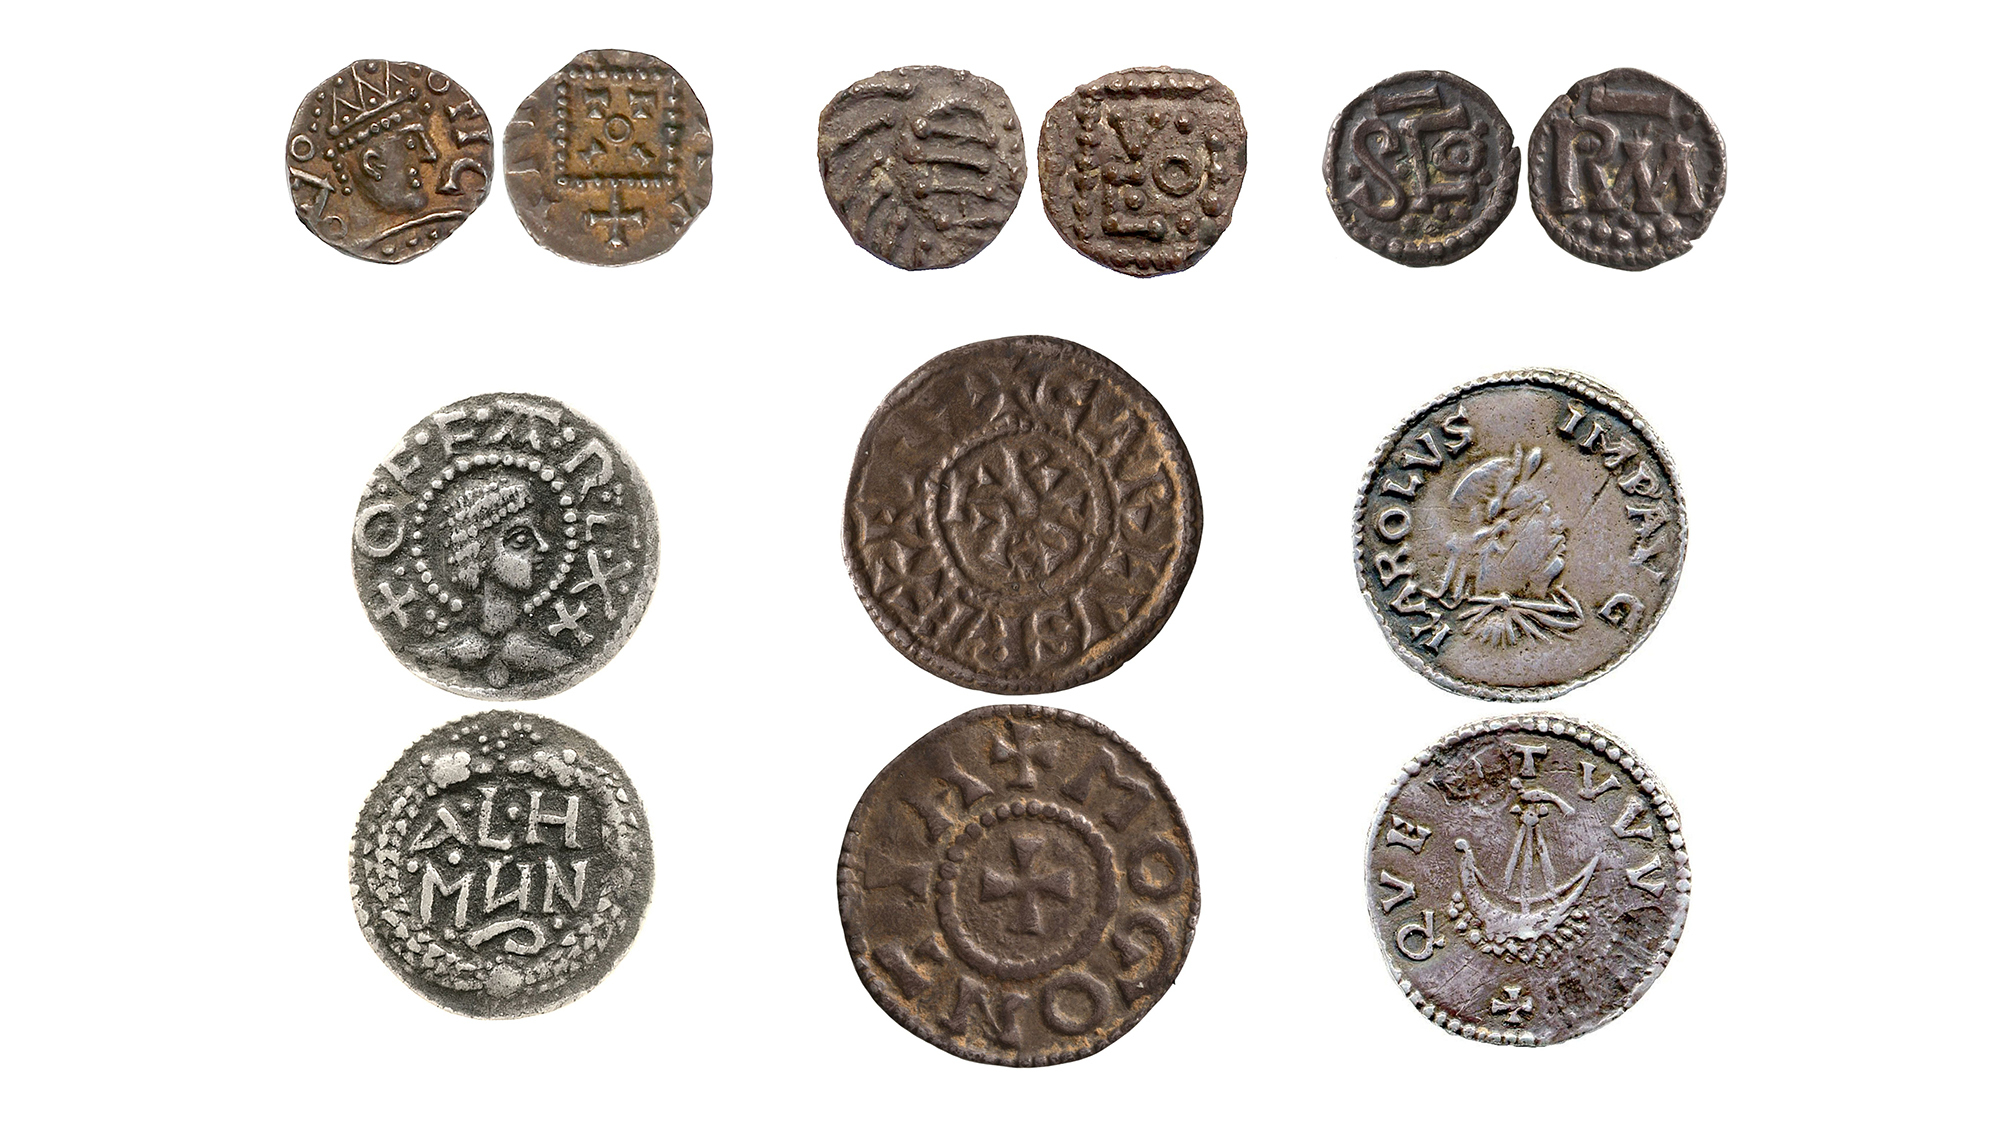 several grey and brown coins dating back from 650 to 670 CE